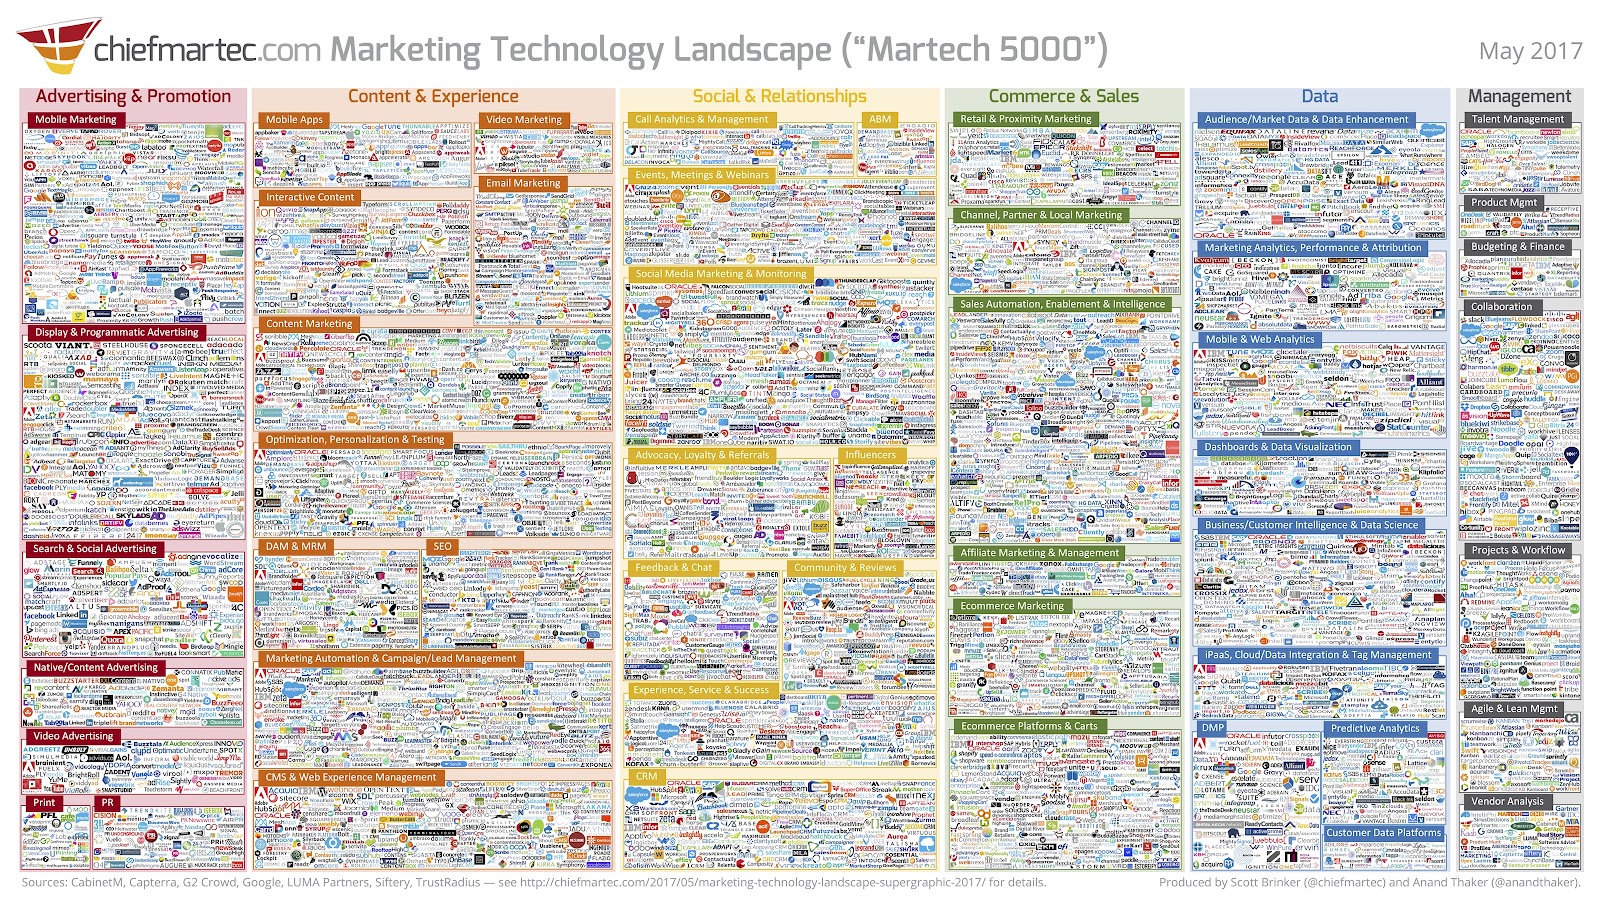 The legendary "Martech 5000" slide, featuring 5,000 companies in the marketing technology landscape.